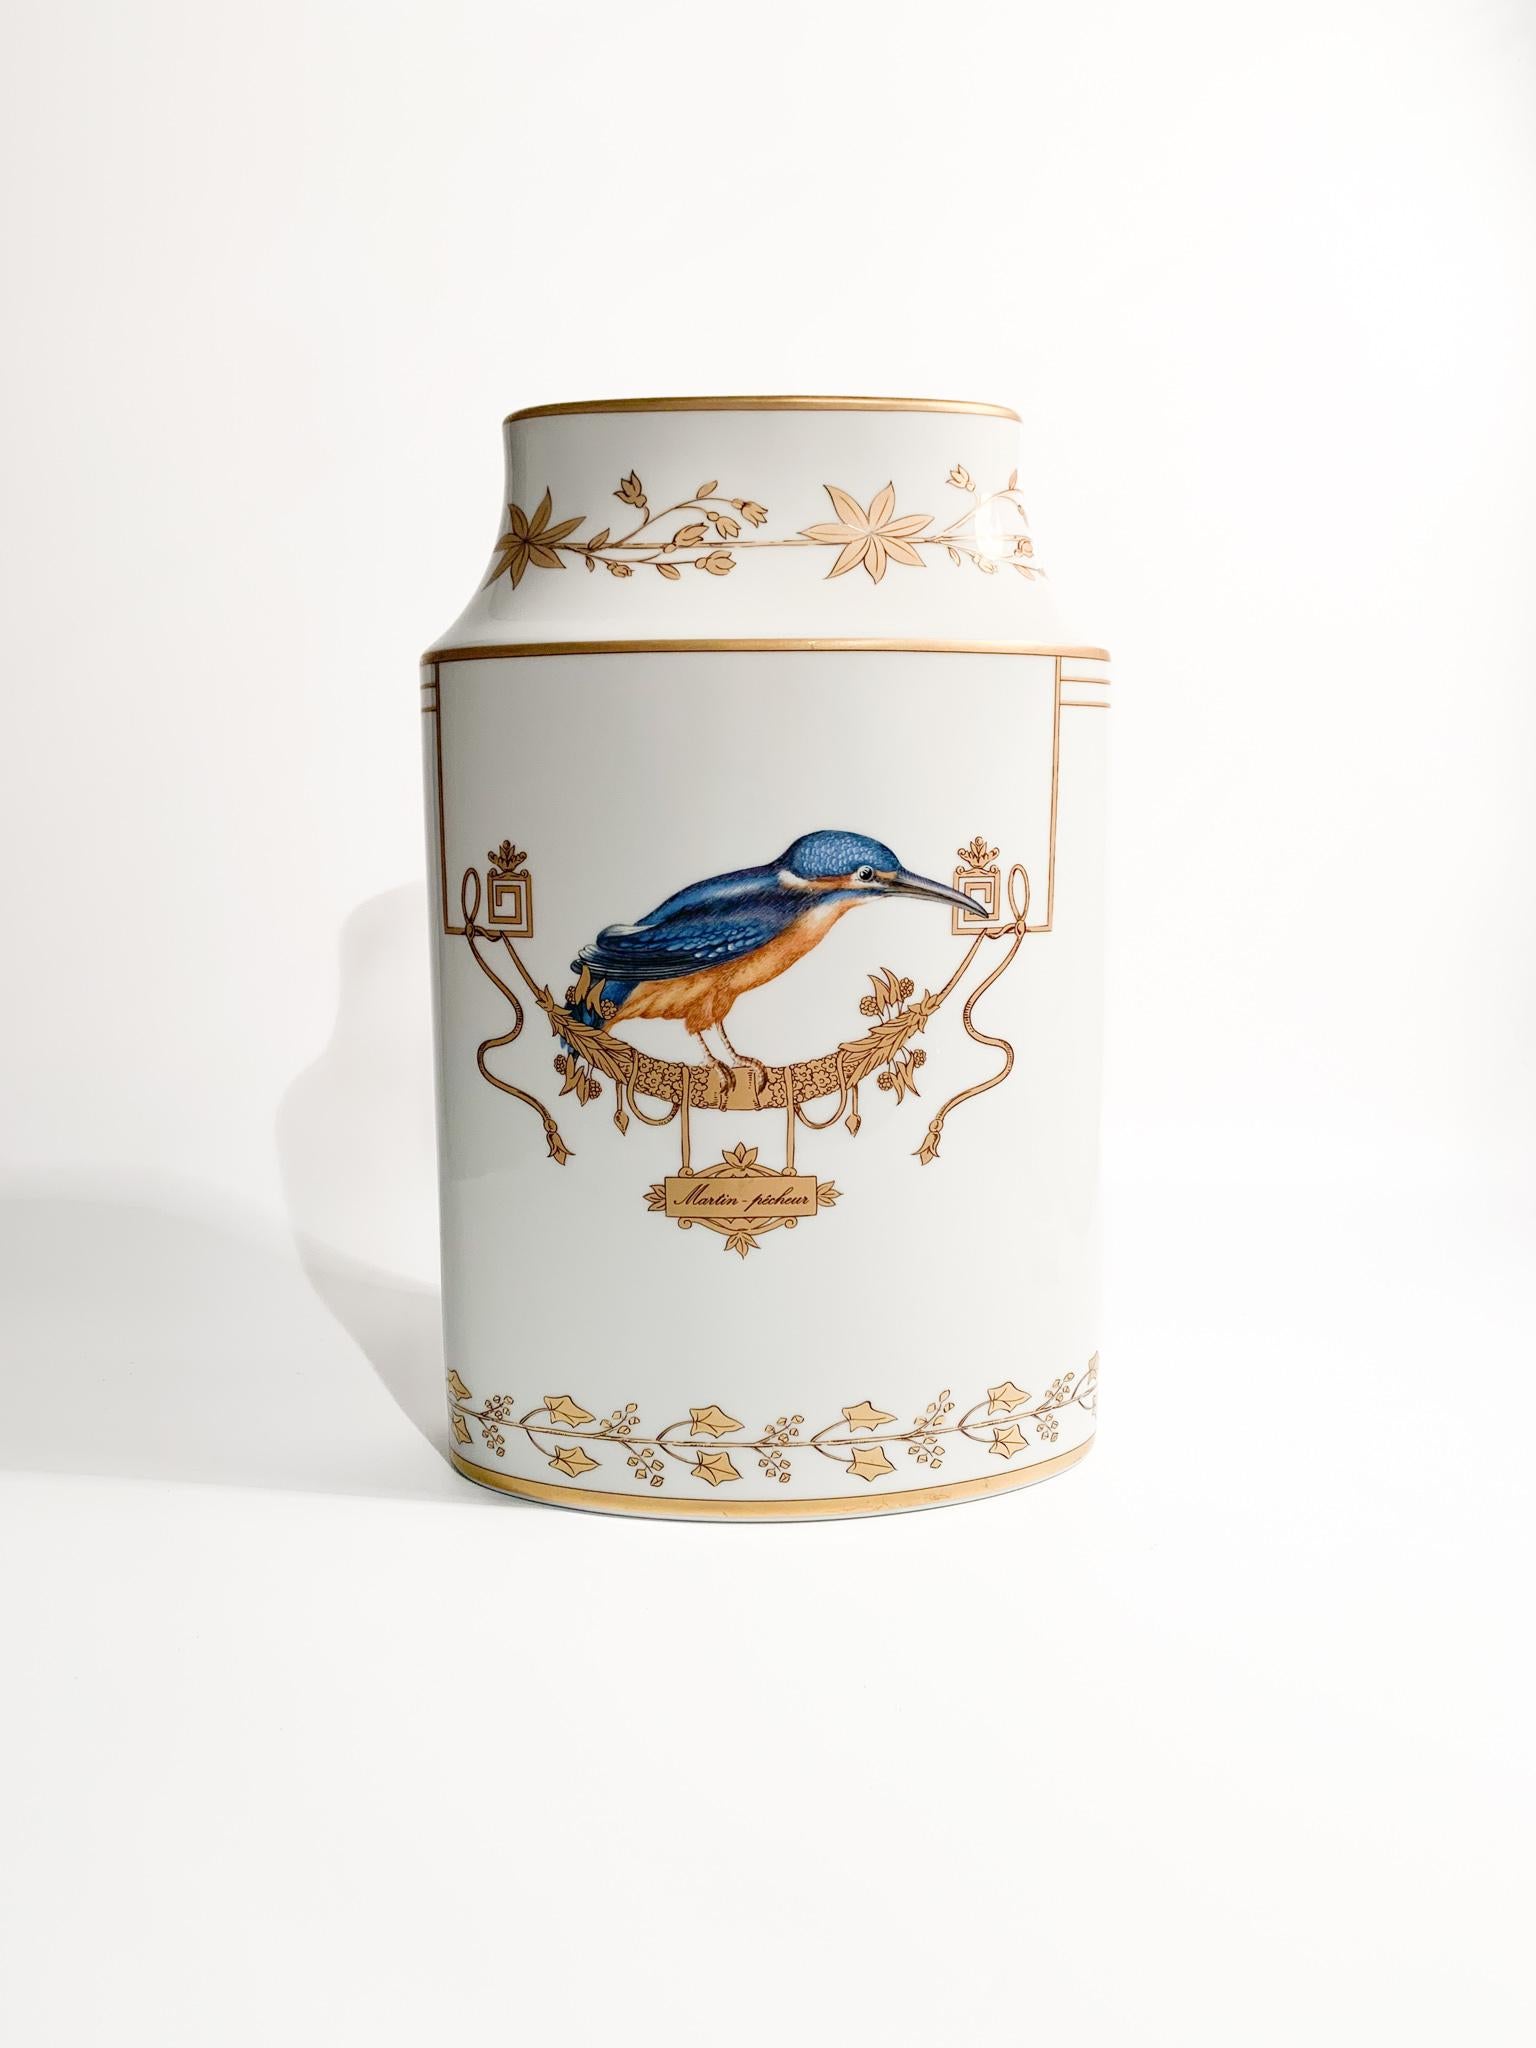 Elliptical porcelain vase by Ginori 1735, Volière collection, depicting a decoration with Kingfisher, Perroquet Nestor and pure gold. 

Ø cm 20 Ø cm 10 h cm 28

Company of Lombard origin founded in 1896 when the Marquis Carlo Ginori, passionate